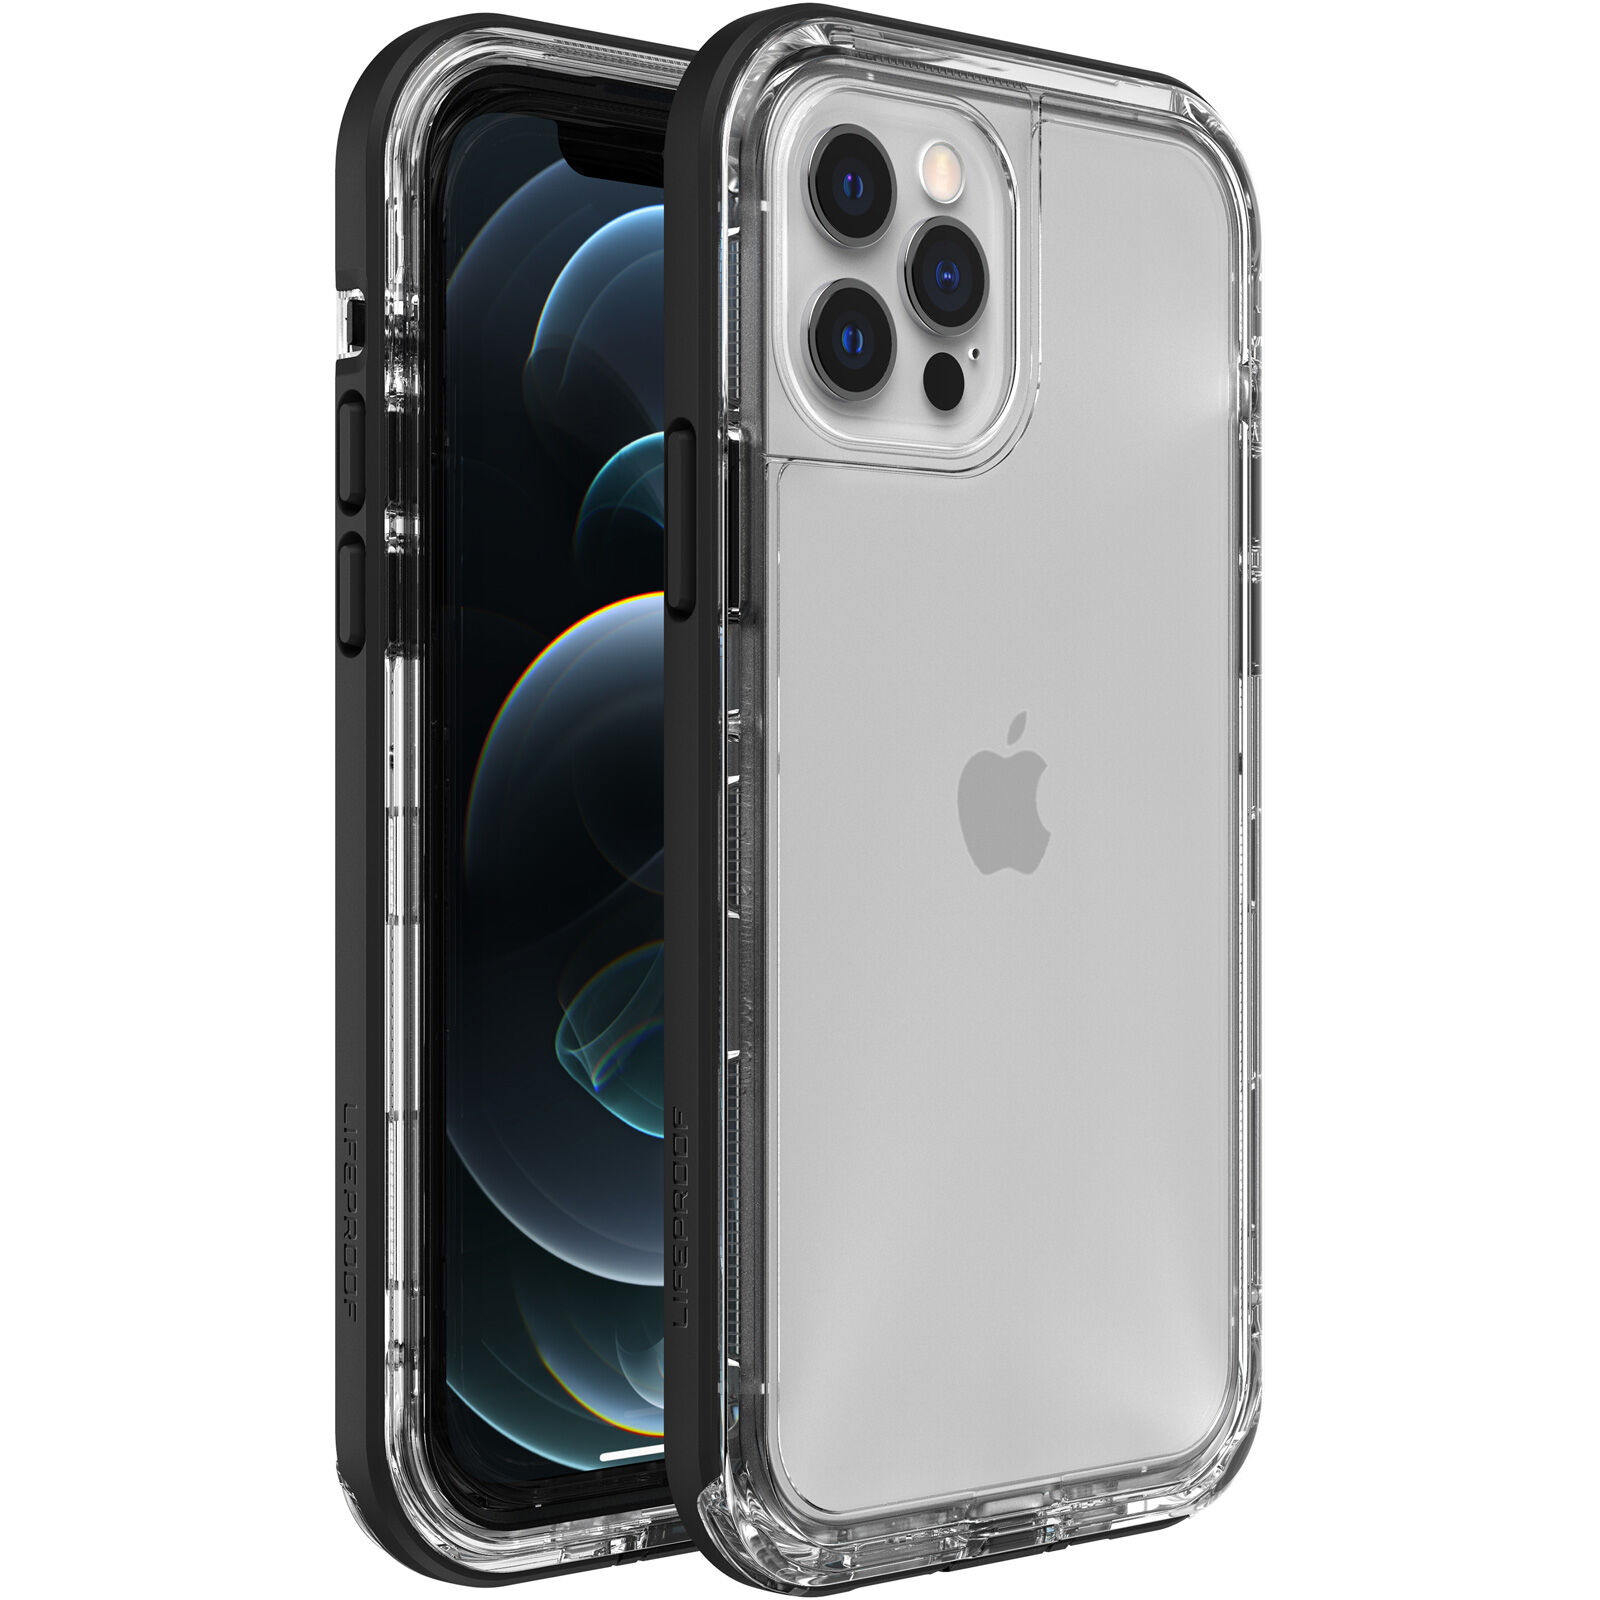 LifeProof Next Direct Touch Black Crystal Case for Apple iPhone 7 8 for sale online 